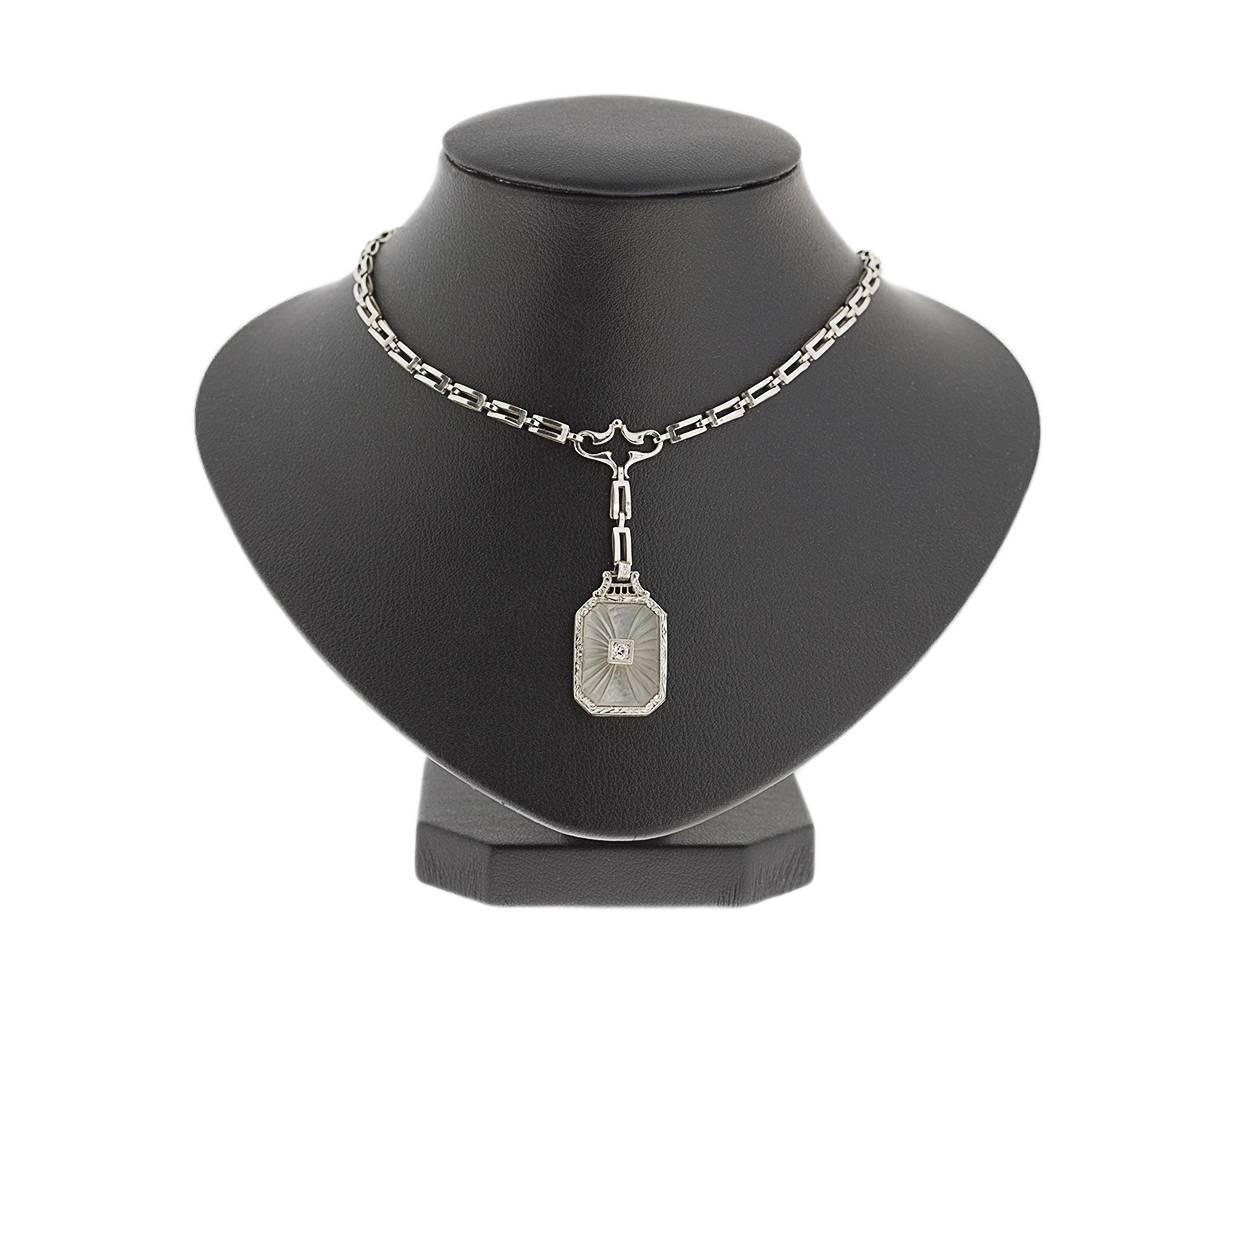 This beautiful estate necklace features a unique vintage design. The center pendant features a carved, frosted crystal with a single small diamond at its center. This crystal is bezel set in 14 karat white gold with a very intricately engraved